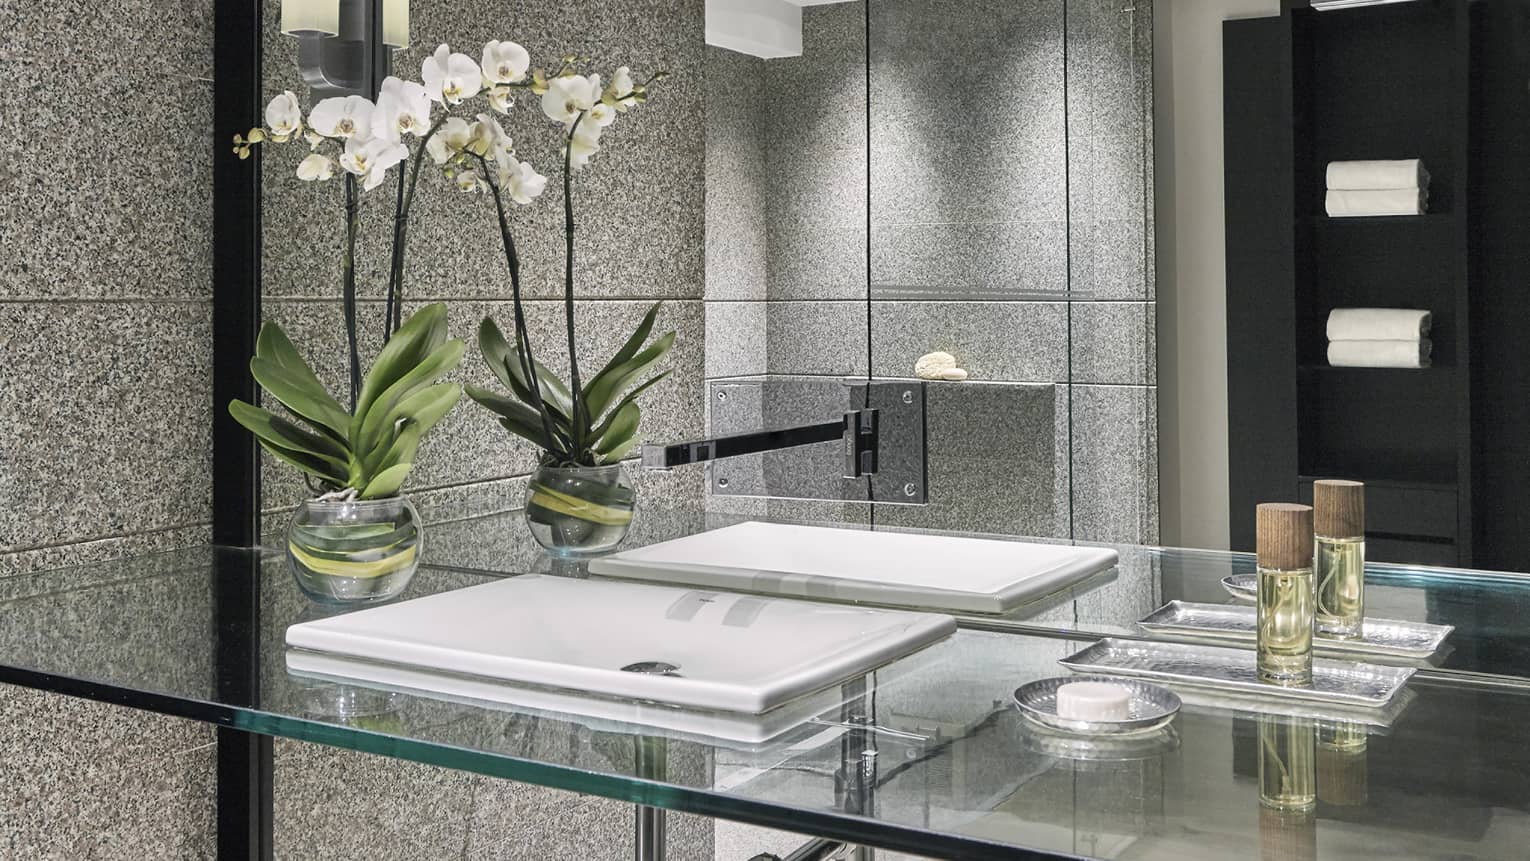 Marble bathroom with a glass vanity and glass-enclosed shower